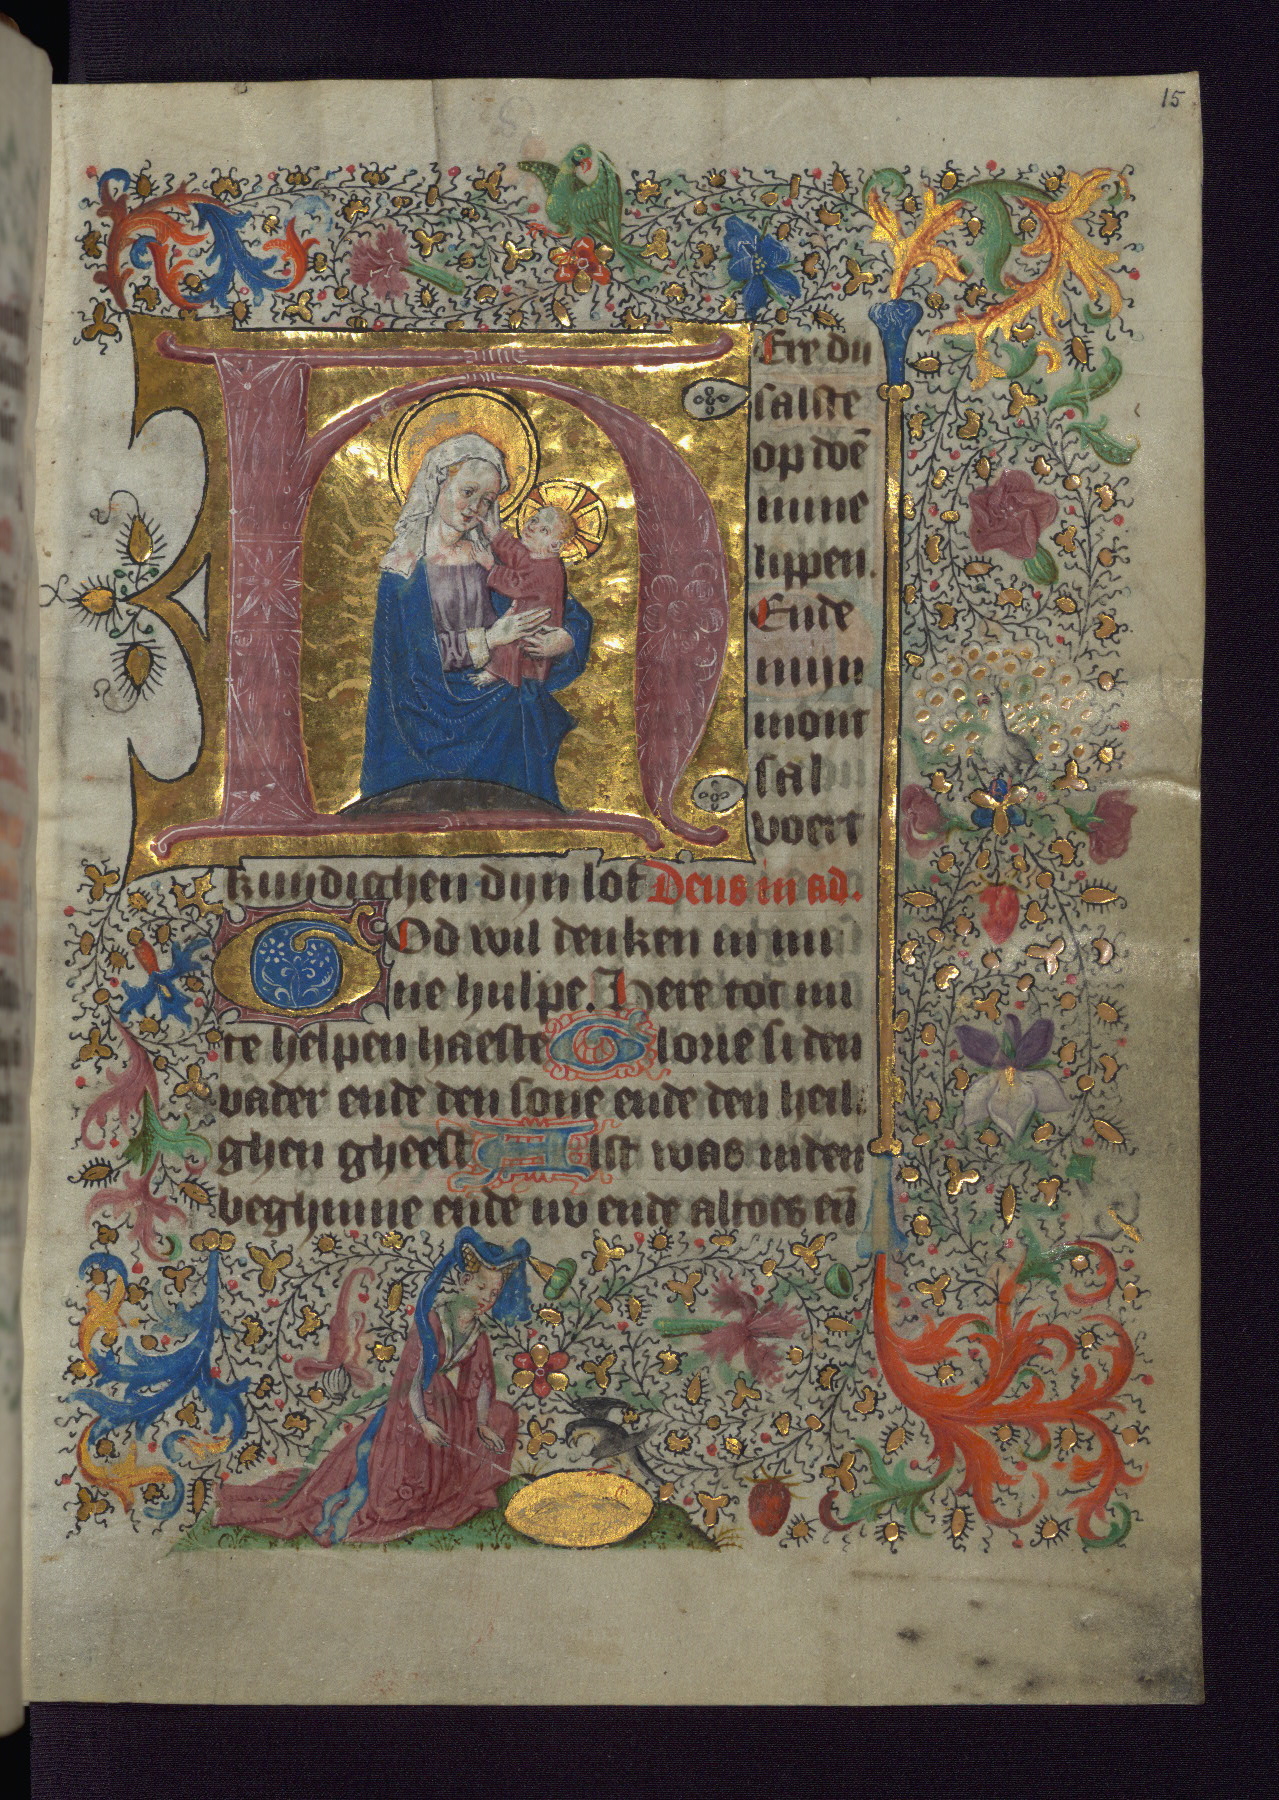 Baltimore, The Walters Art Museum, MS W.782, folio 15r. Van Alphen Hours. Dutch Book of Hours made for a female patron in the mid 15th century. Opening page of the Hours of the Virgin: "Here du salste opdoen mine lippen". Image via Creative Commons. At the bottom of the bordered page, an elegantly dressed woman sits before a shiny bowl- or mirror-like object, in order, perhaps, to perform skrying or to lure a unicorn.